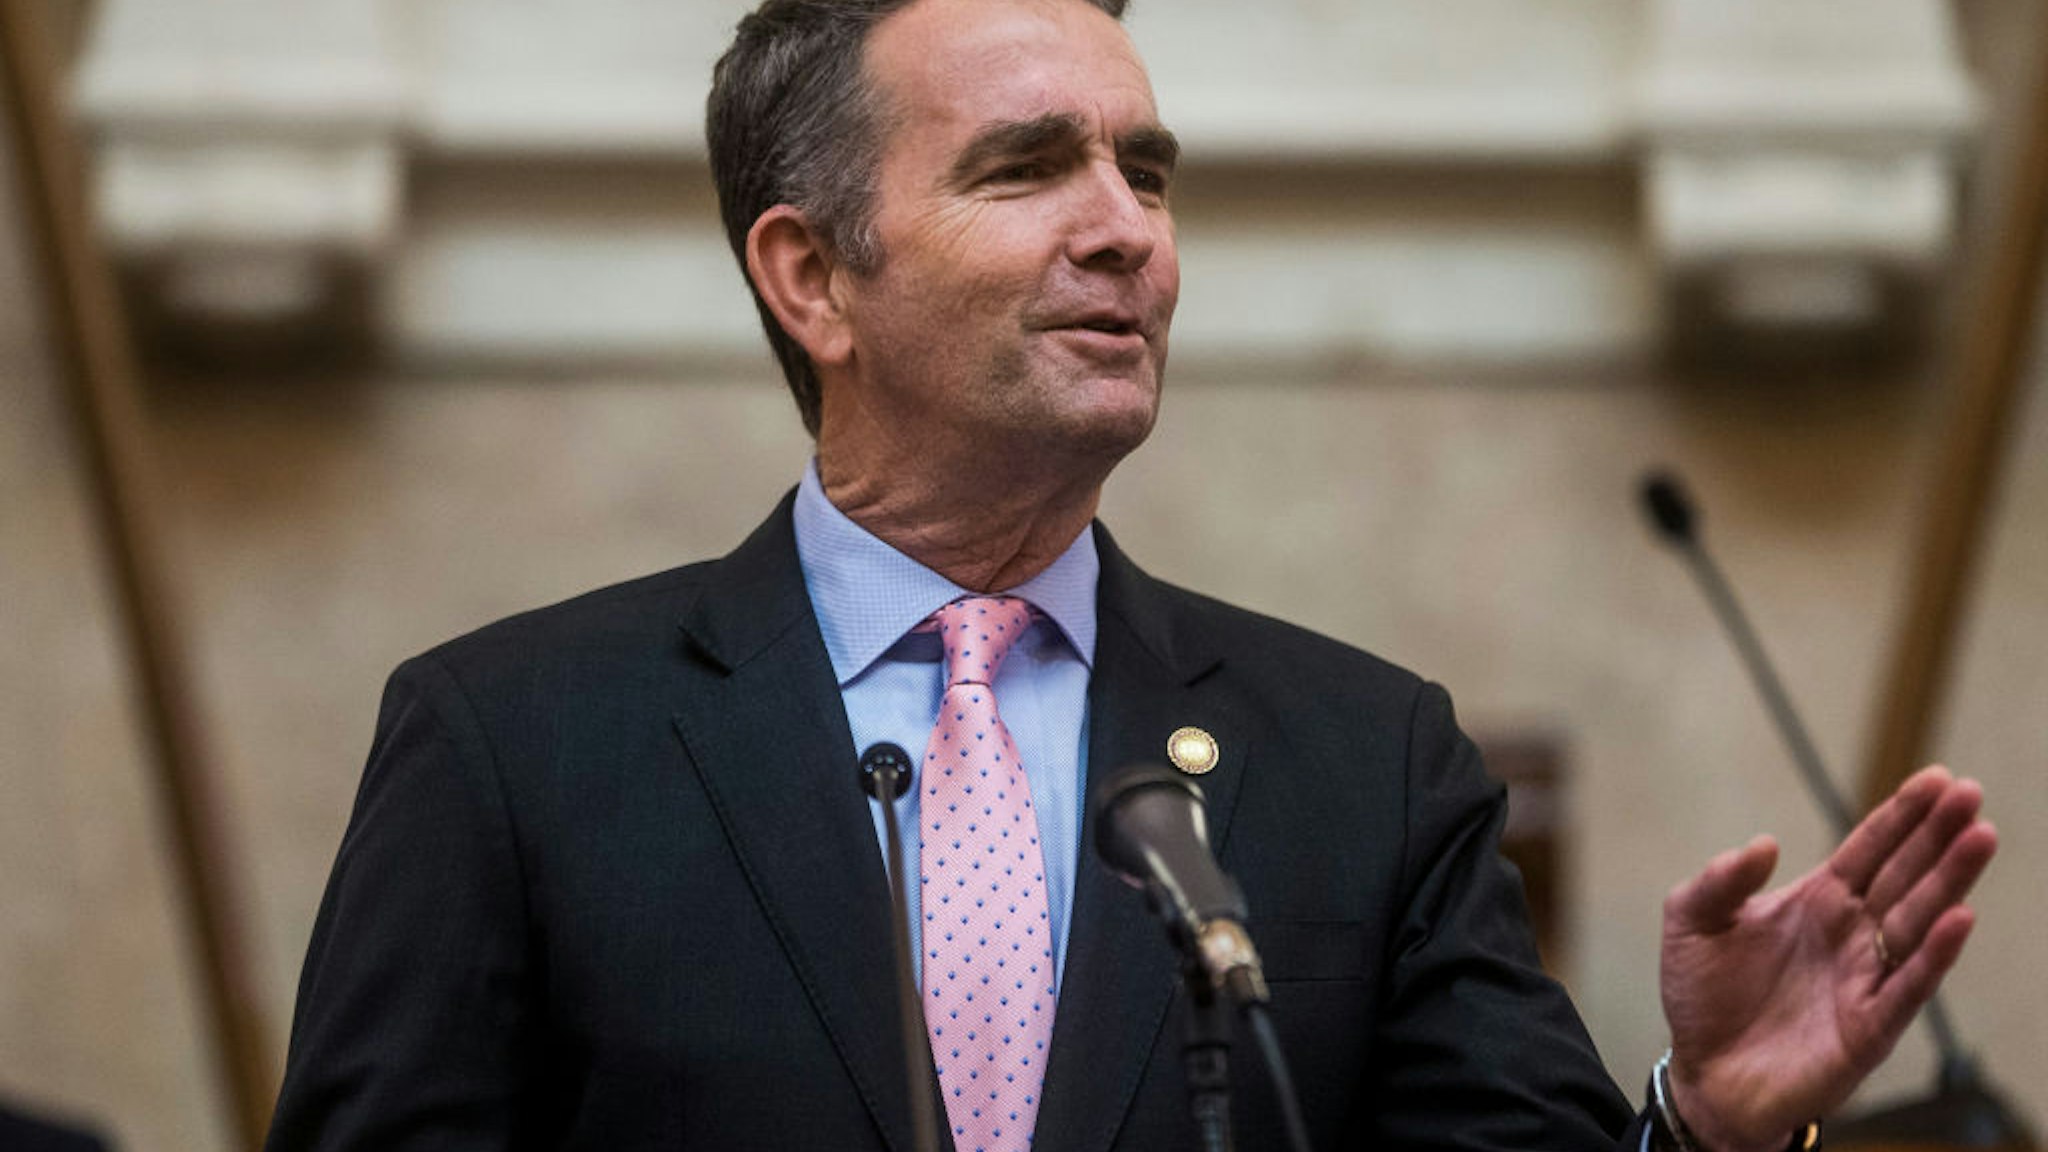 Gov. Ralph Northam delivers the State of the Commonwealth address at the Virginia State Capitol on January 8, 2020 in Richmond, Virginia.